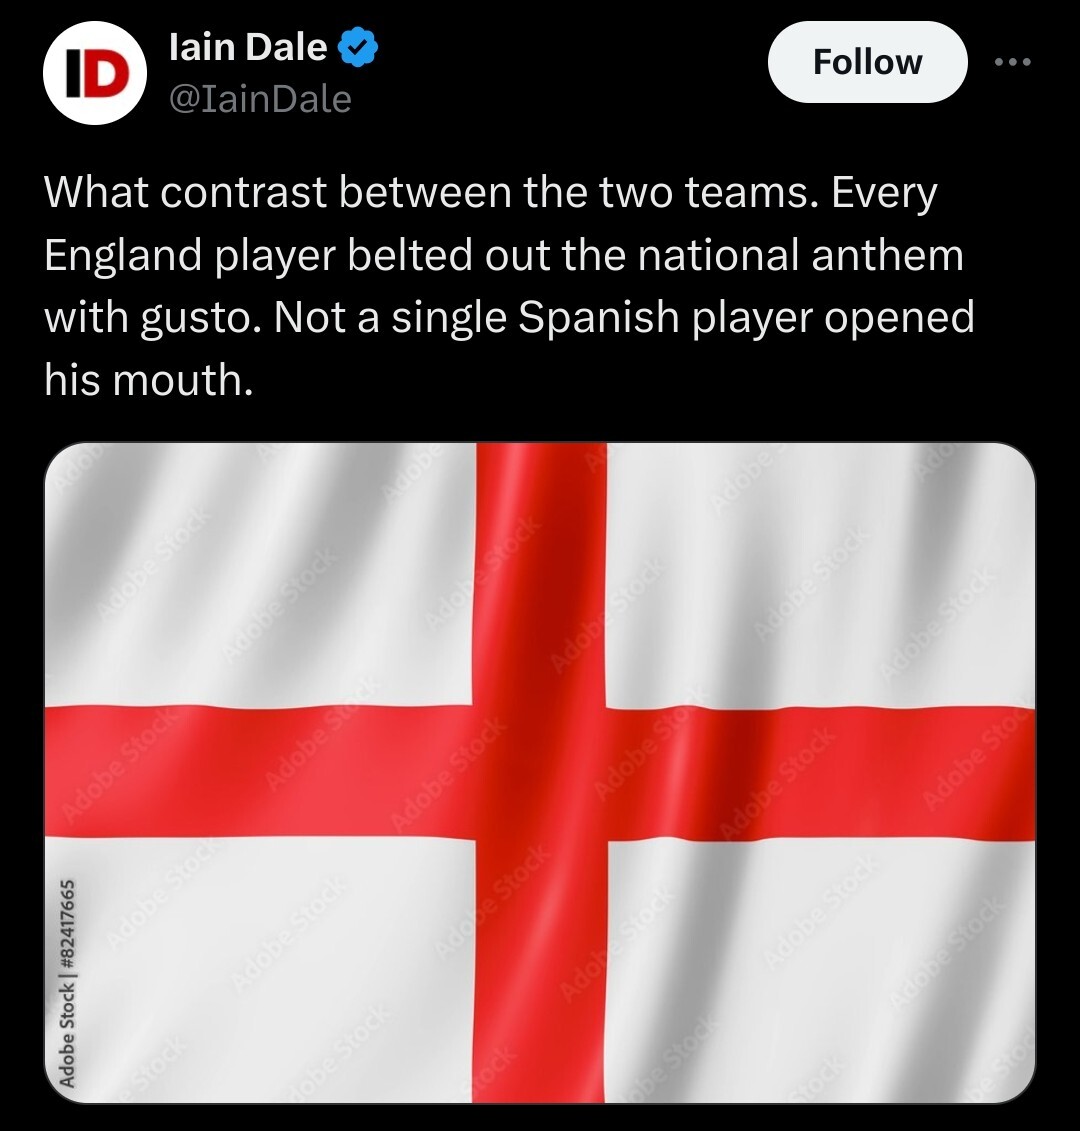 Iain Dale: "What contrast between the two teams. Every England player belted out the national anthem with gusto. Not a single Spanish player opened his mouth."